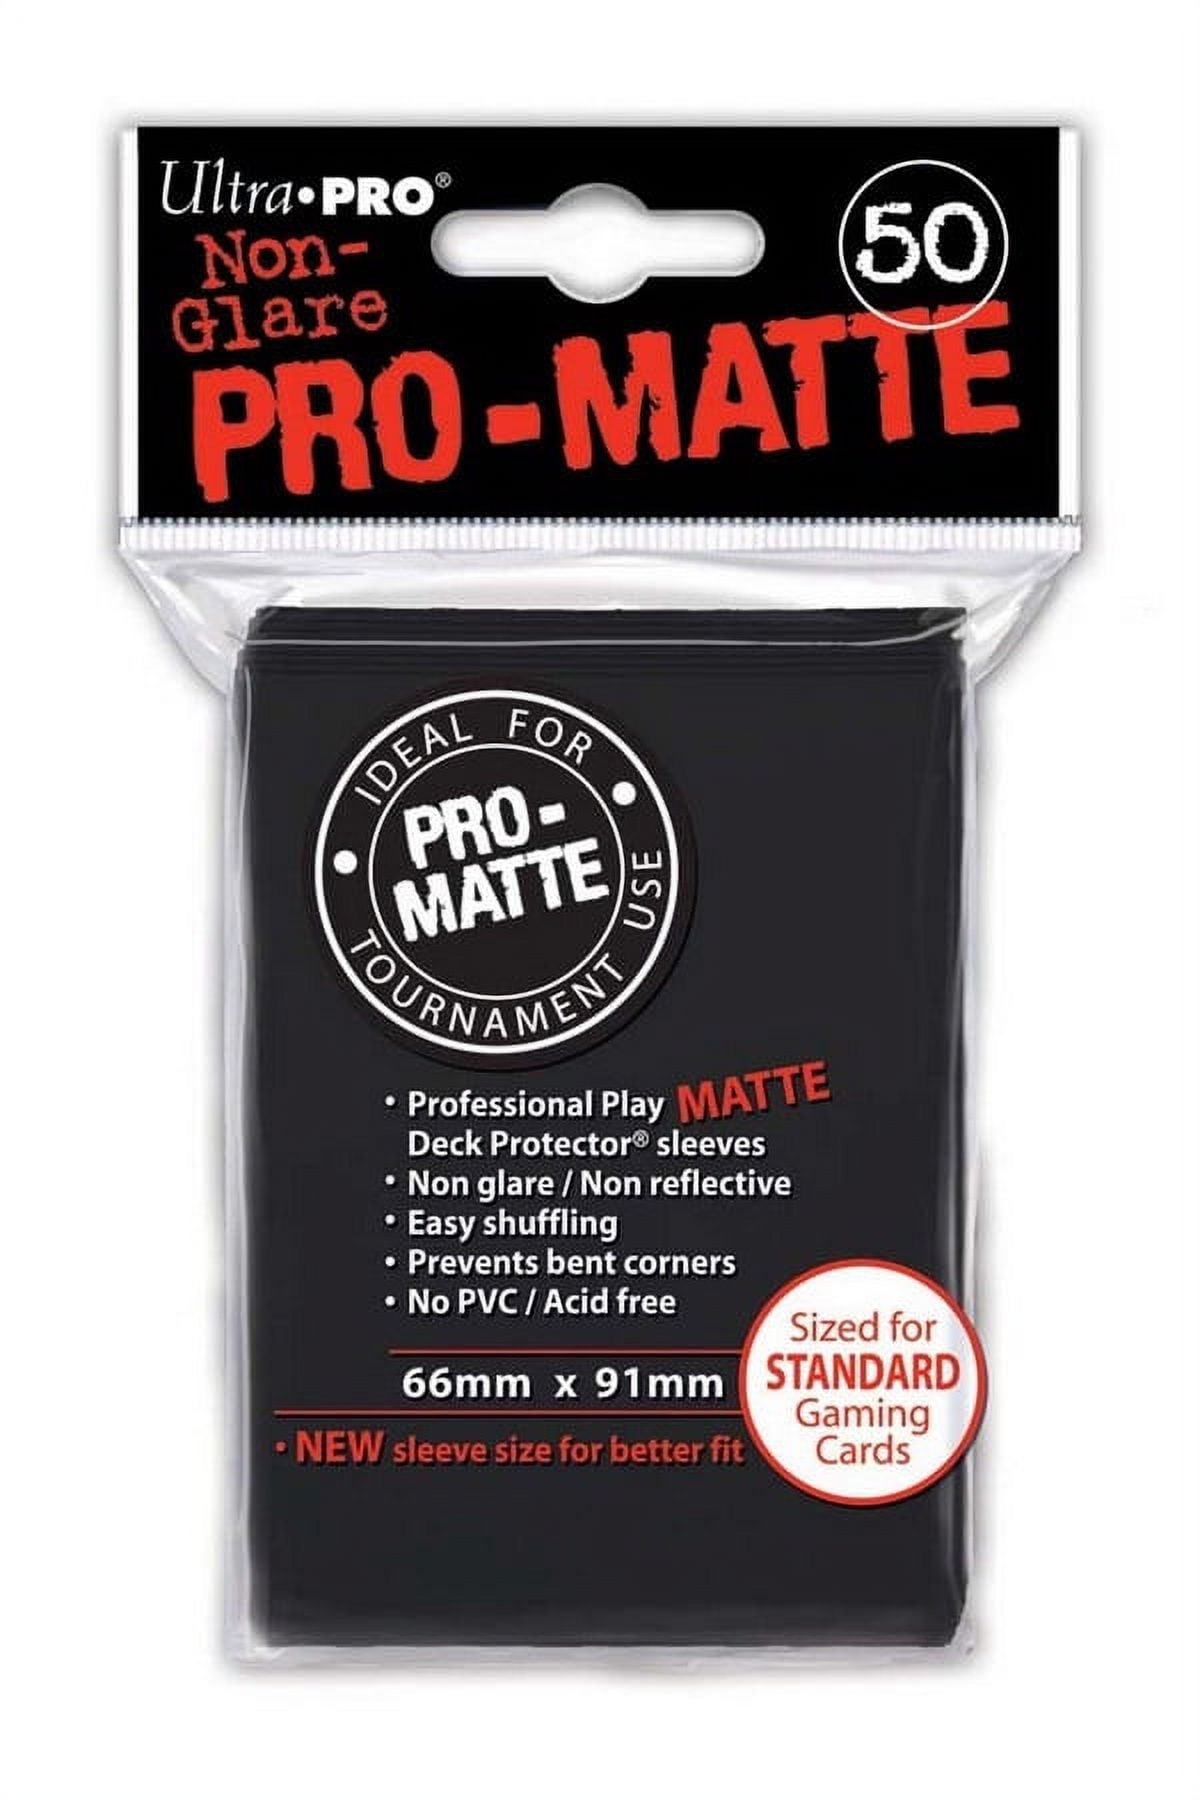 Ultra-PRO Non-Glare PRO-MATTE Deck Protector Card Sleeves 50 ct x2 WHITE -  100ct